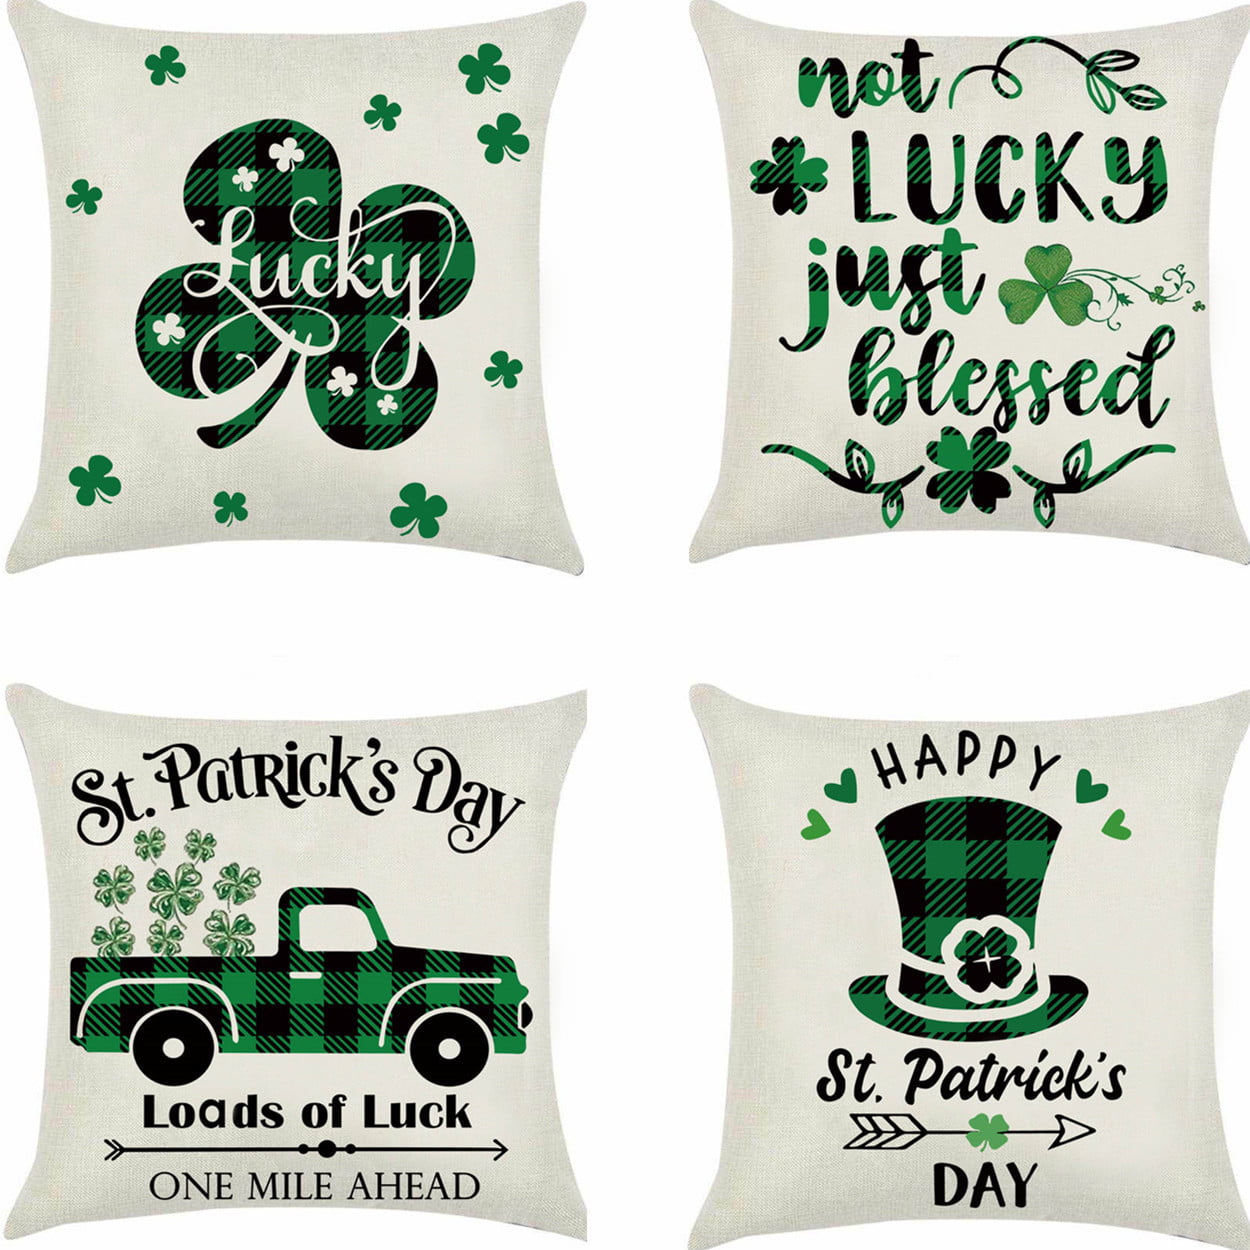 St Patrick/'s Day Pillow Covers 18 x18 Inch Buffalo Check Throw Pillow Cover